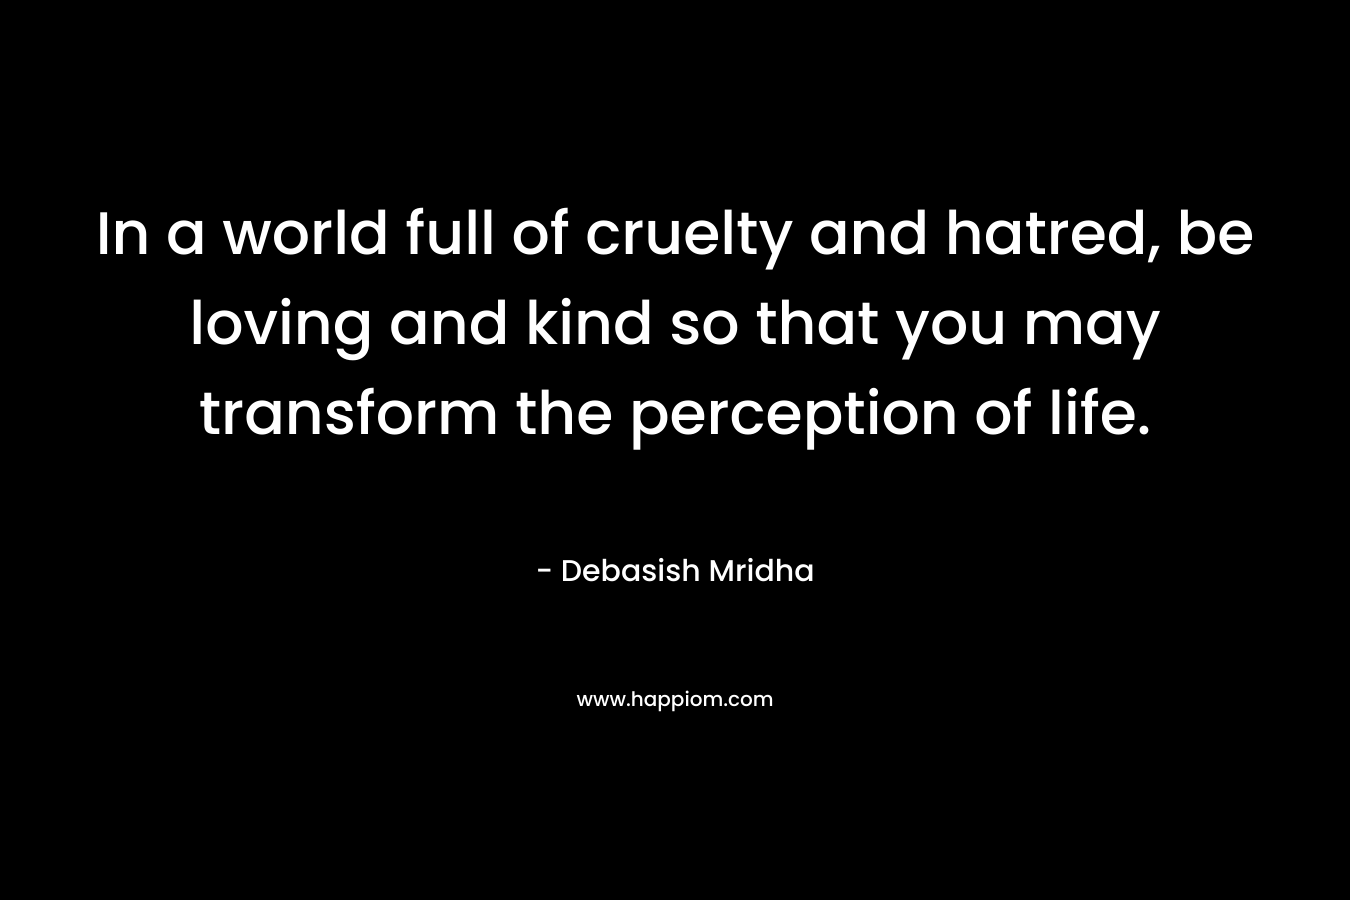 In a world full of cruelty and hatred, be loving and kind so that you may transform the perception of life.